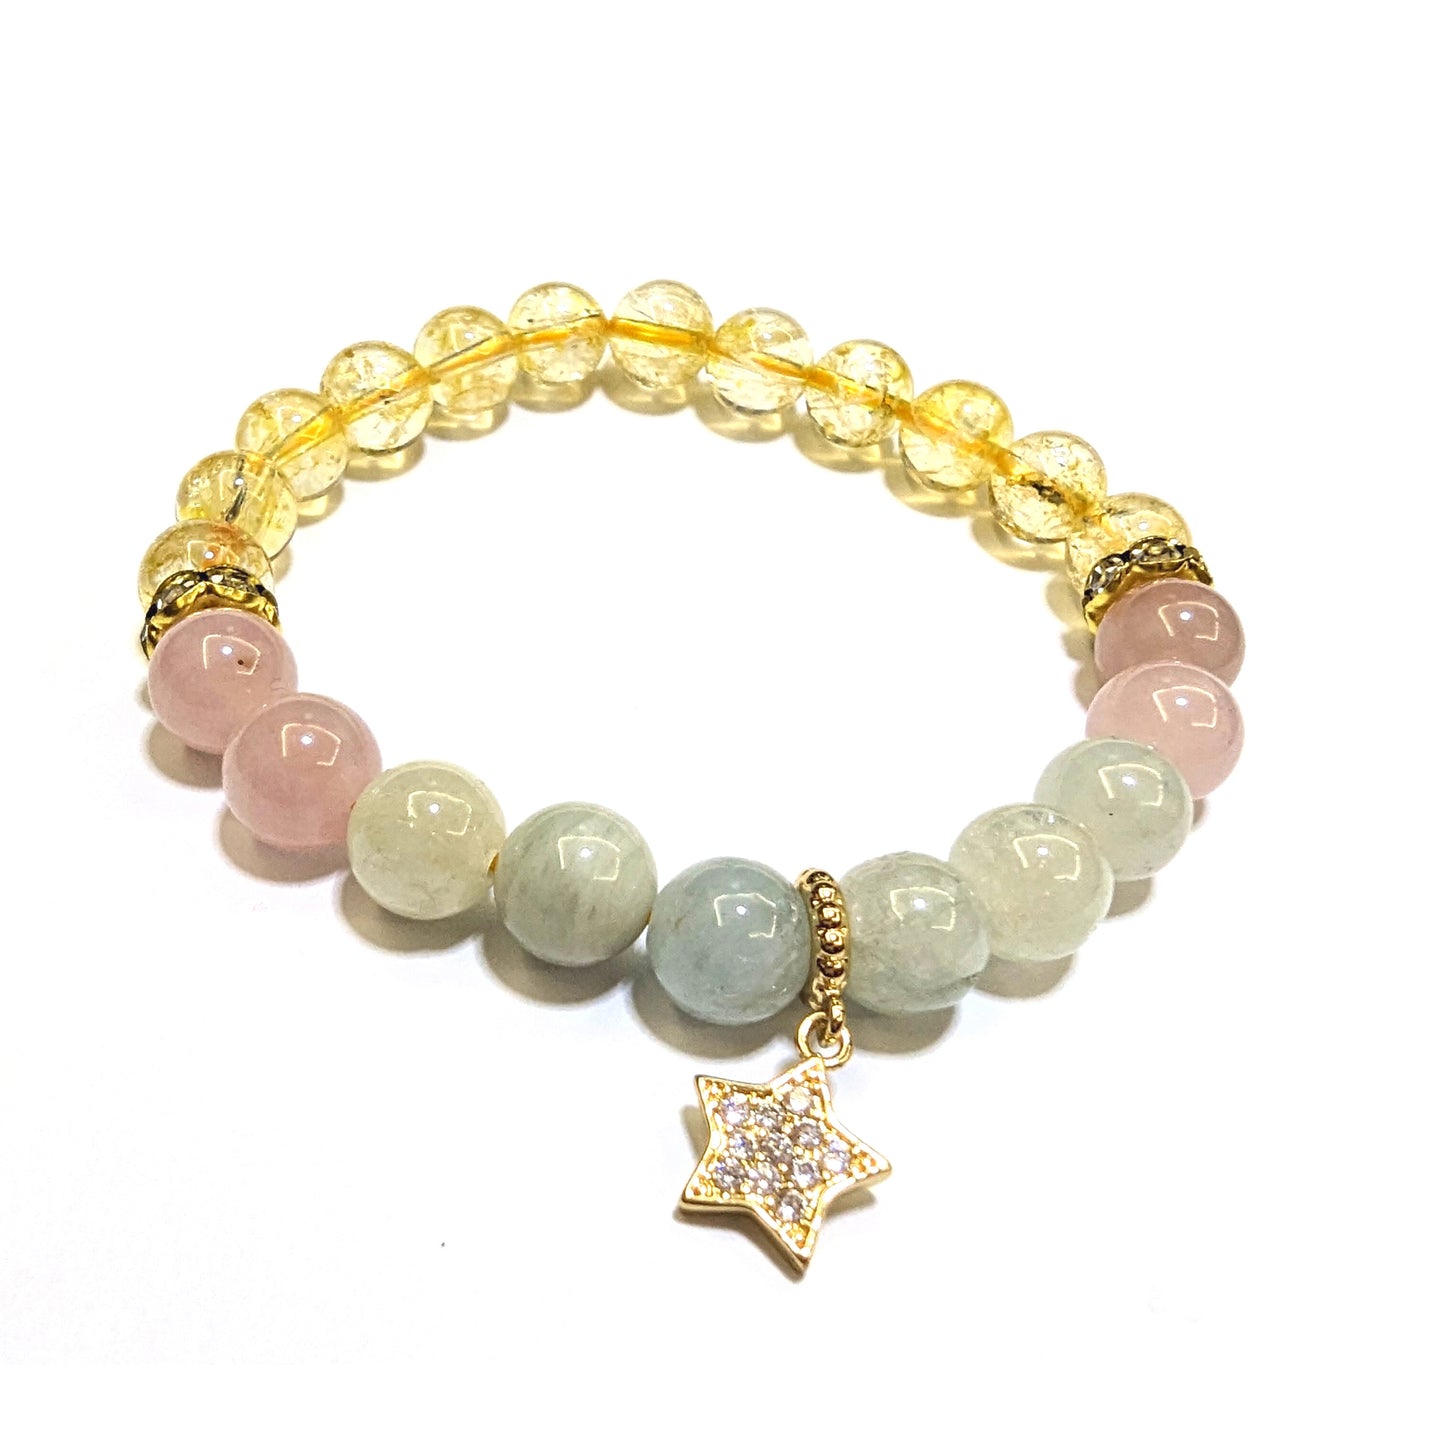 All-in-One with Star or Evil Eye Charm